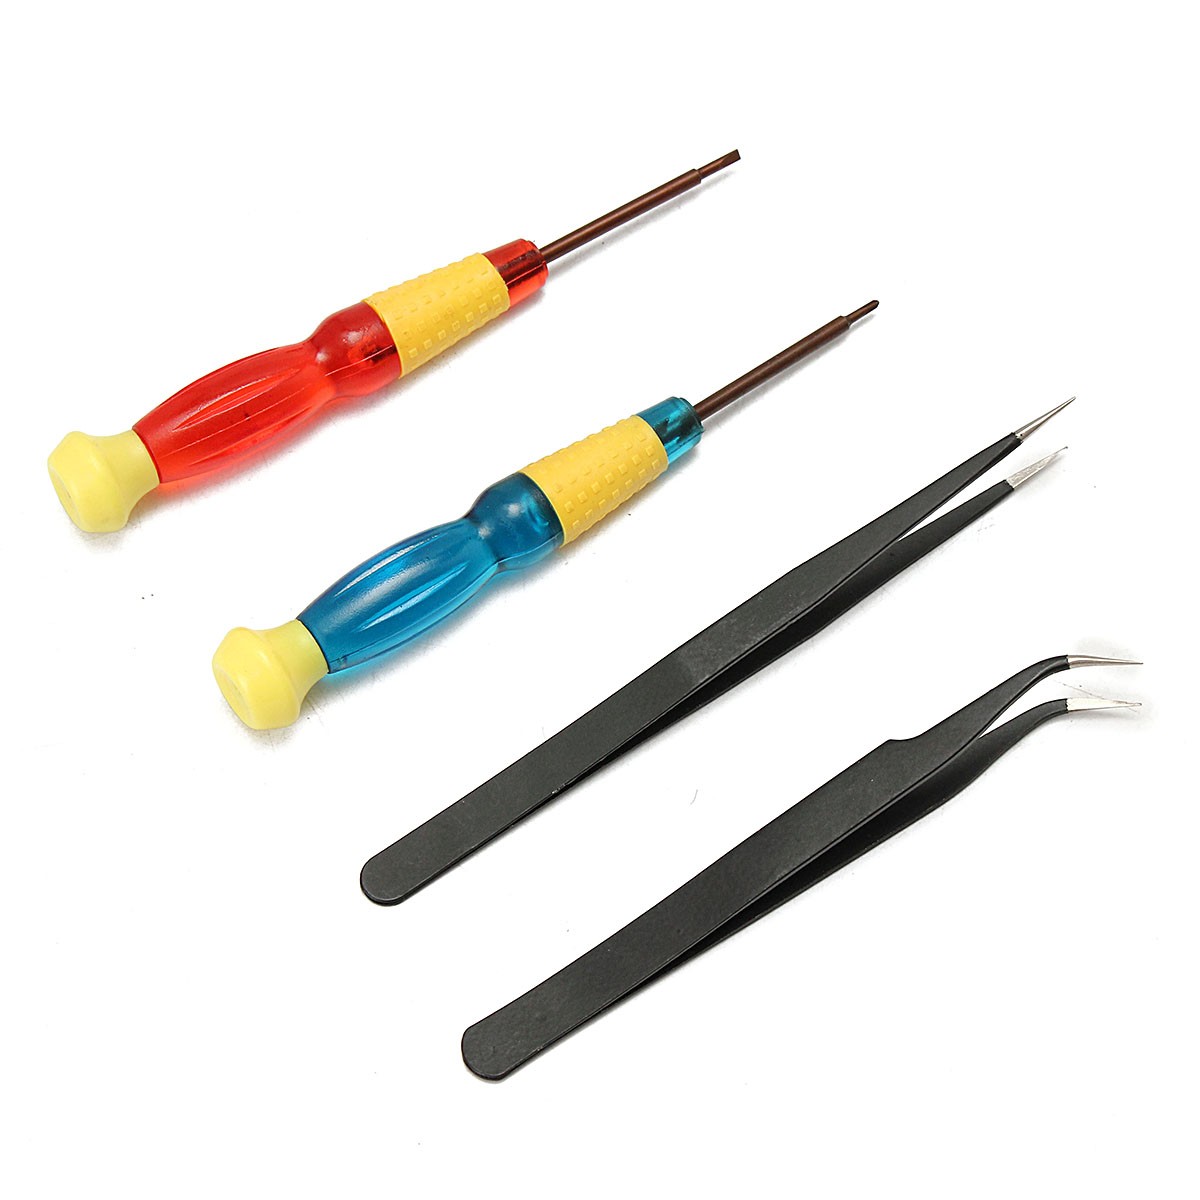 17in1-Electric-Soldering-Tools-Kit-Set-Iron-Stand-Desoldering-Pump-30W-110V-1300343